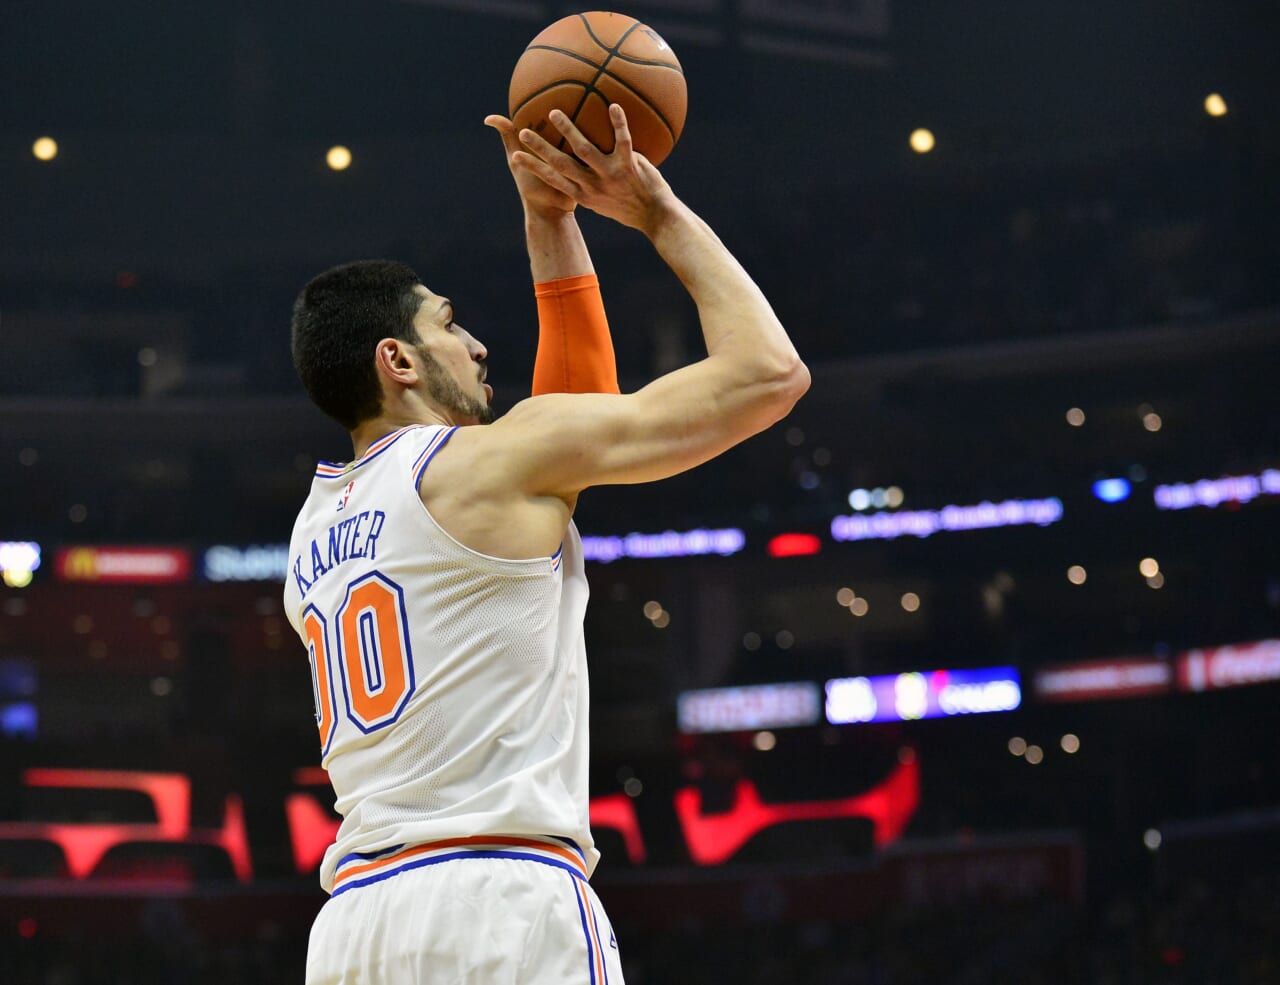 What Should The New York Knicks Do With Enes Kanter – Options